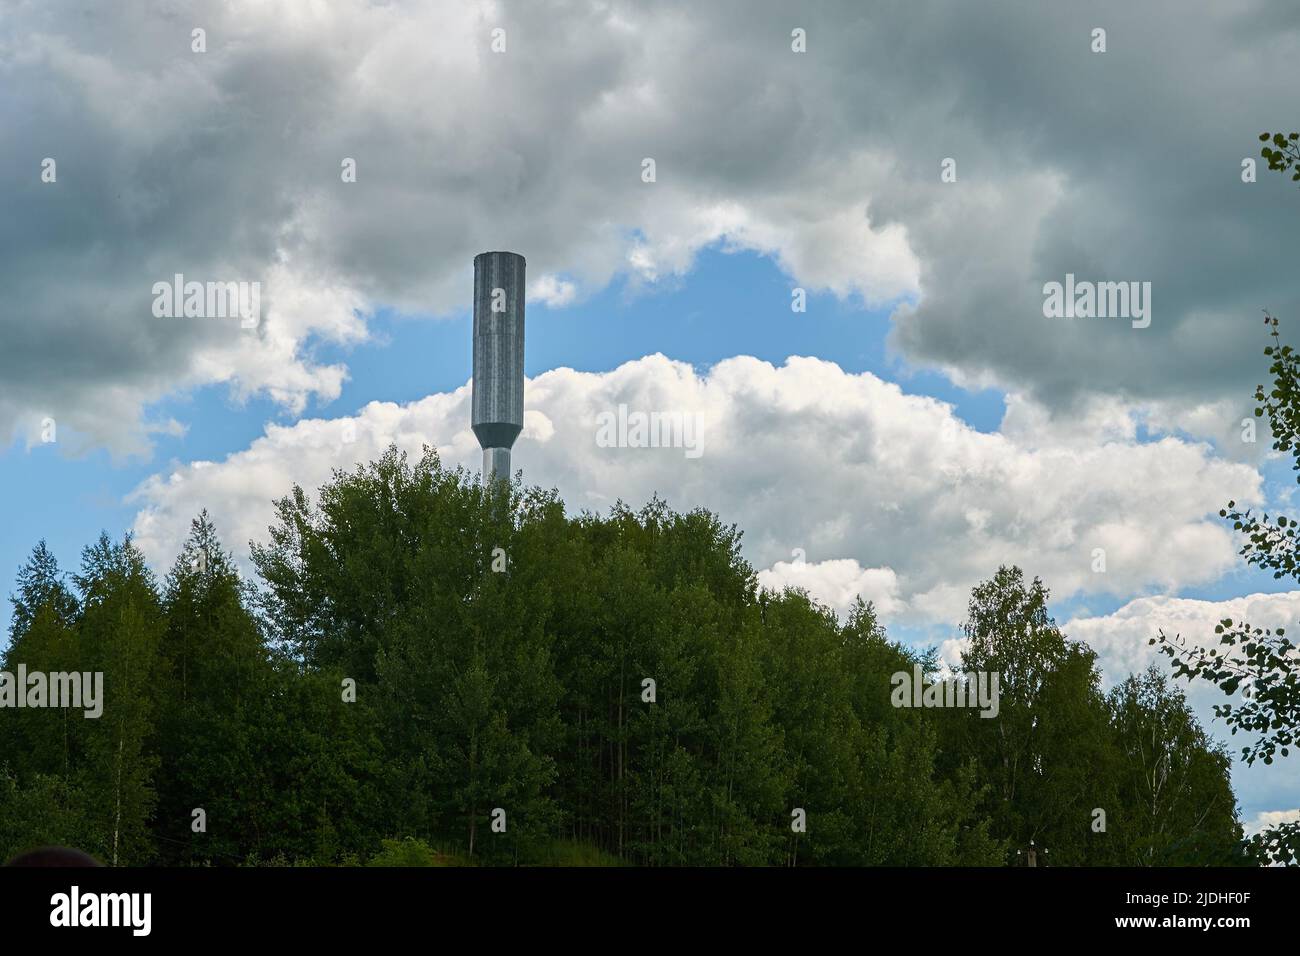 Metal water tower on a background of cloudy sky and trees Stock Photo